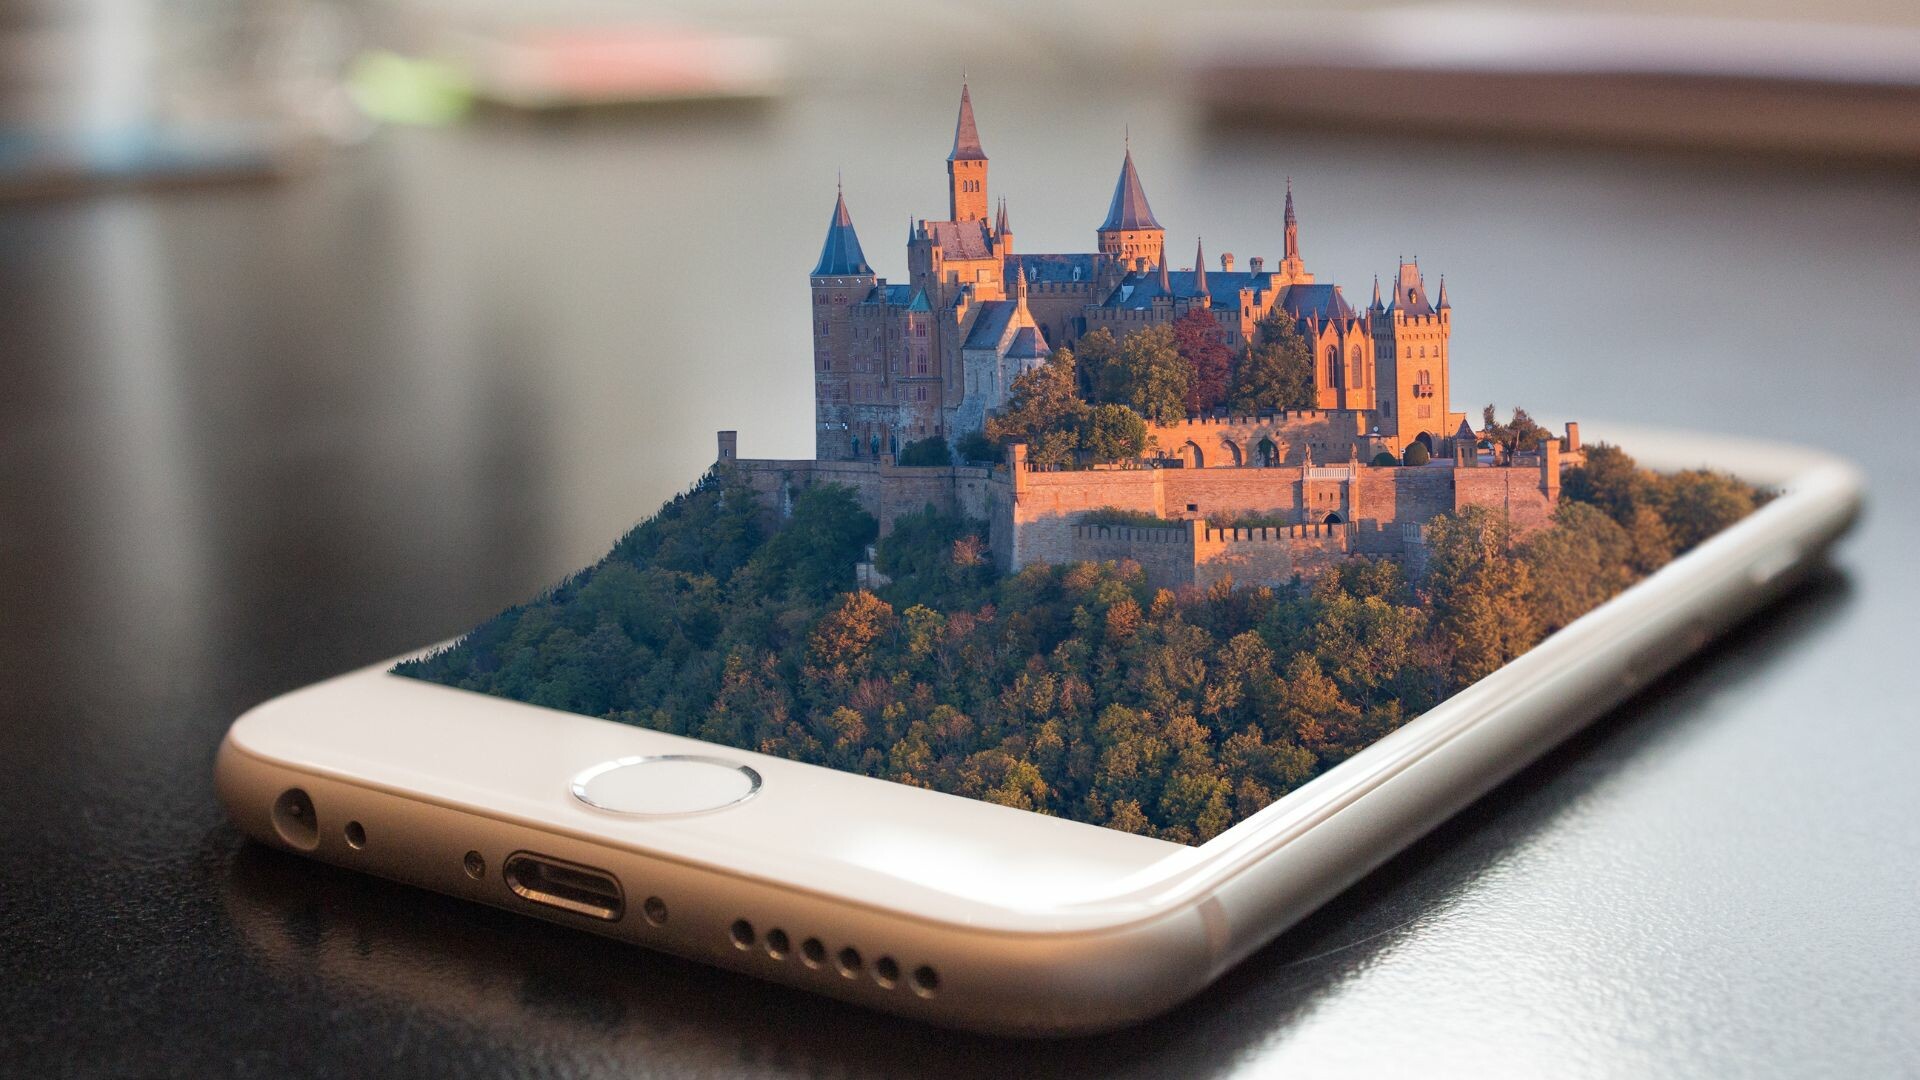 3D image of a castle coming out of a phone.